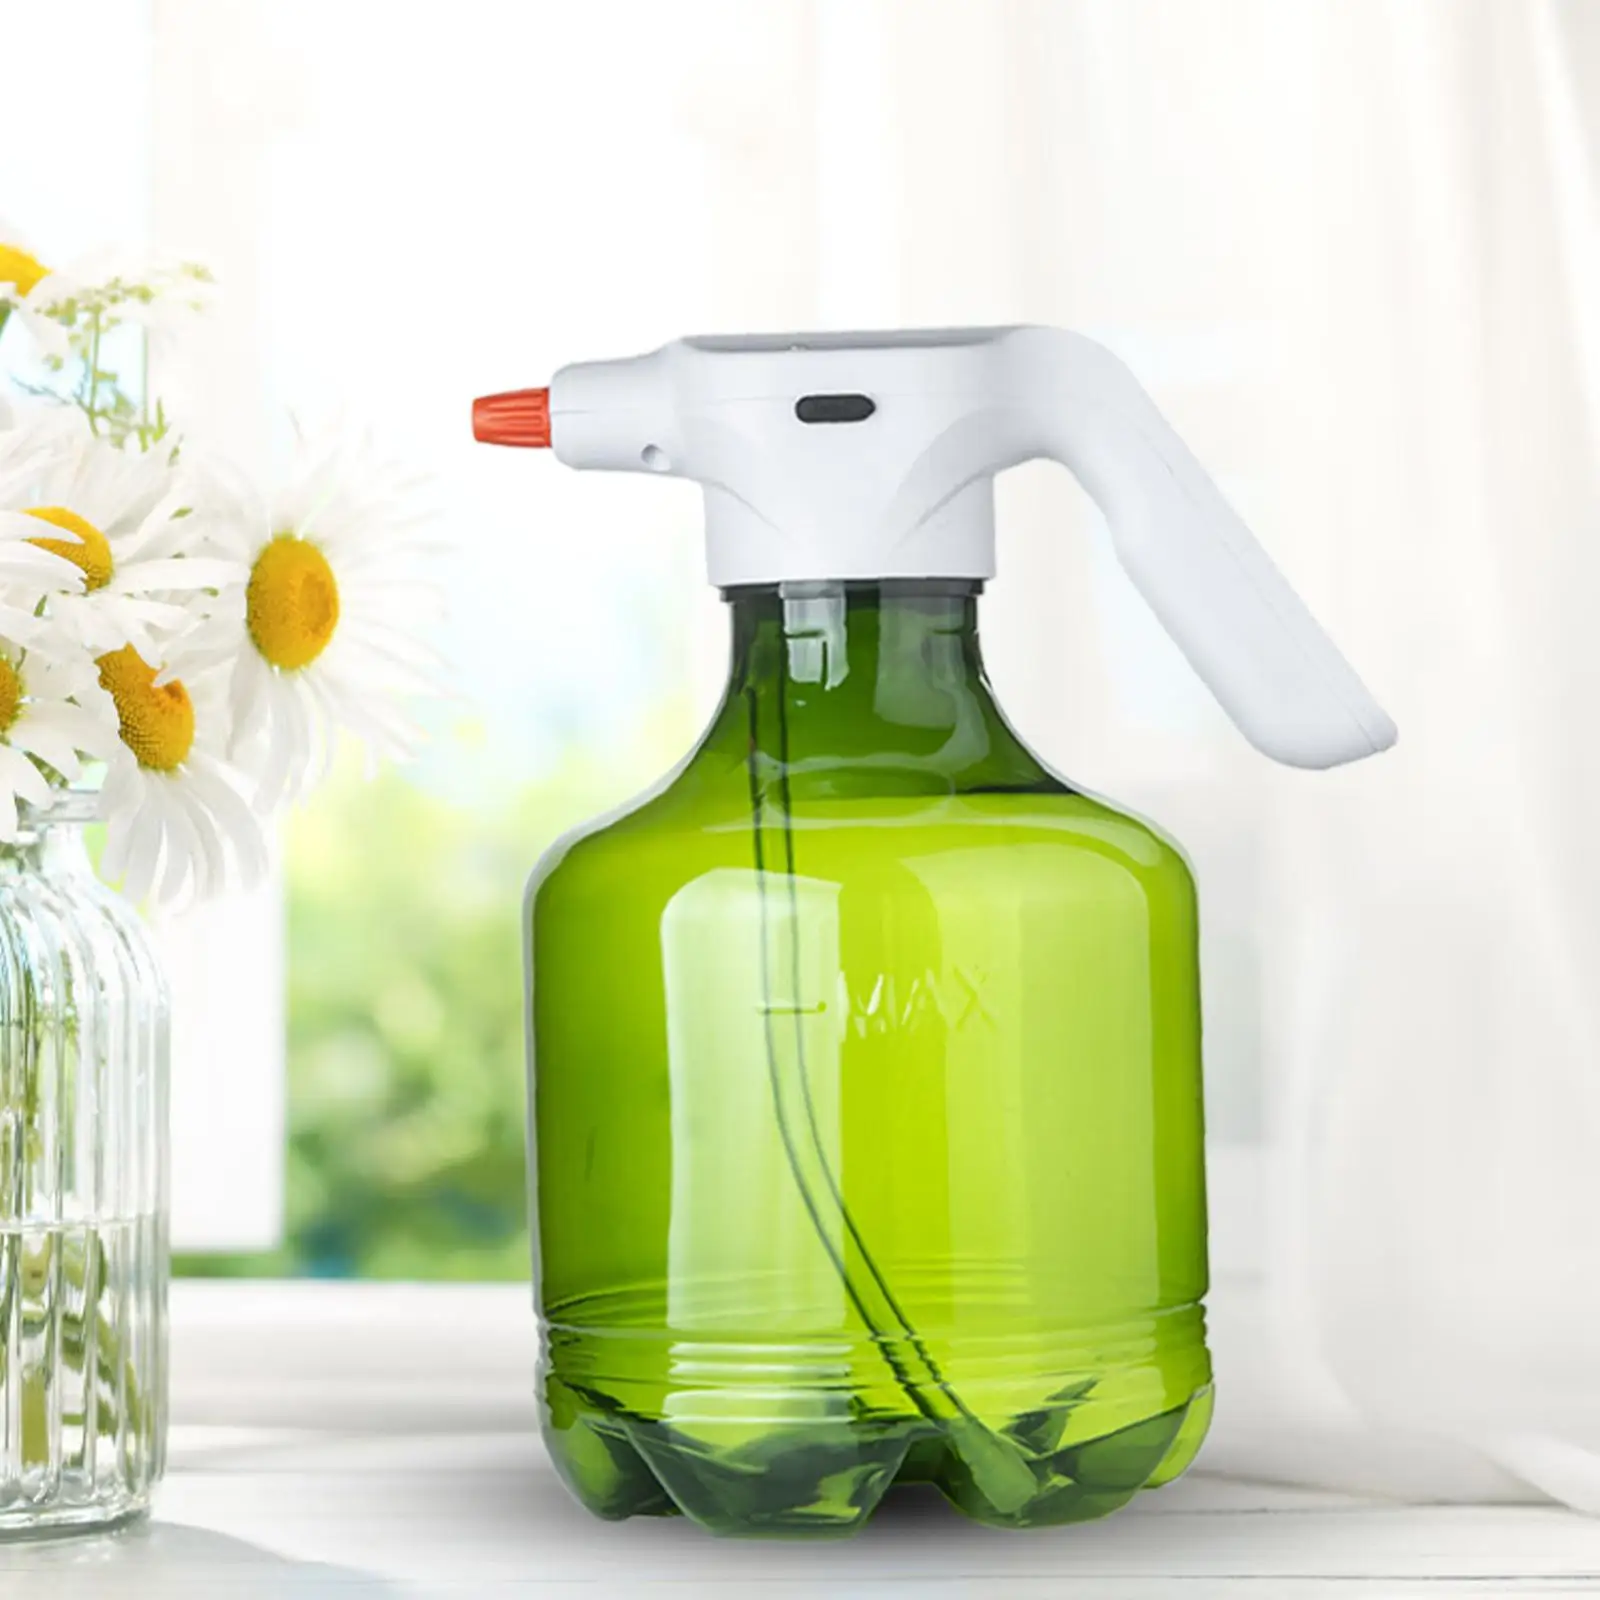 Handheld Electric Plant Mister Spray Bottle 3L Electric Watering Can Lawn Yard Indoor Outdoor Plants Cleaning Home Gardening